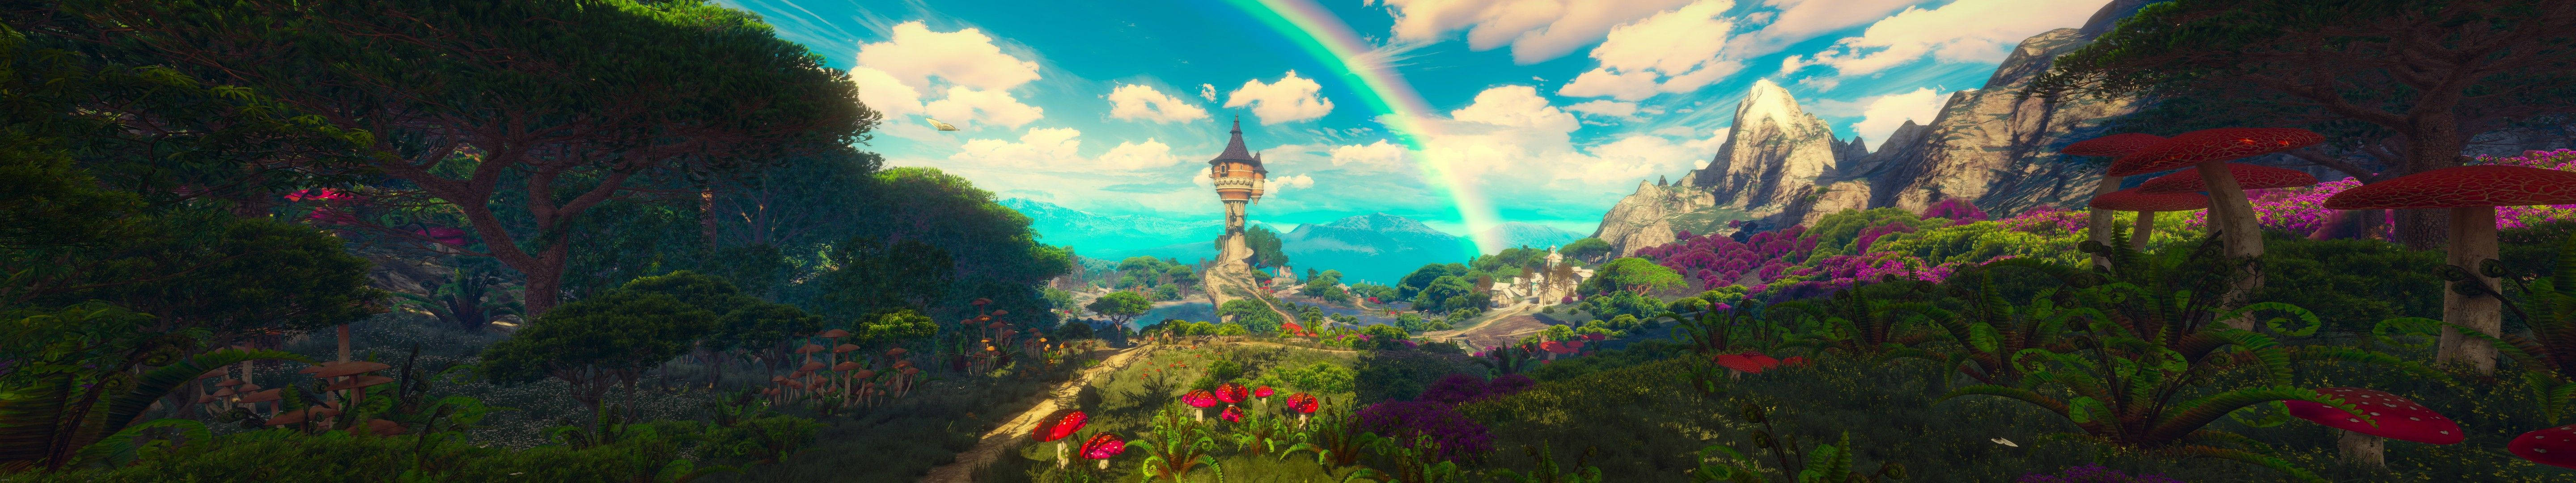 Explore the Witcher 3 Wild Hunt - Land of a Thousand Fables Wallpaper